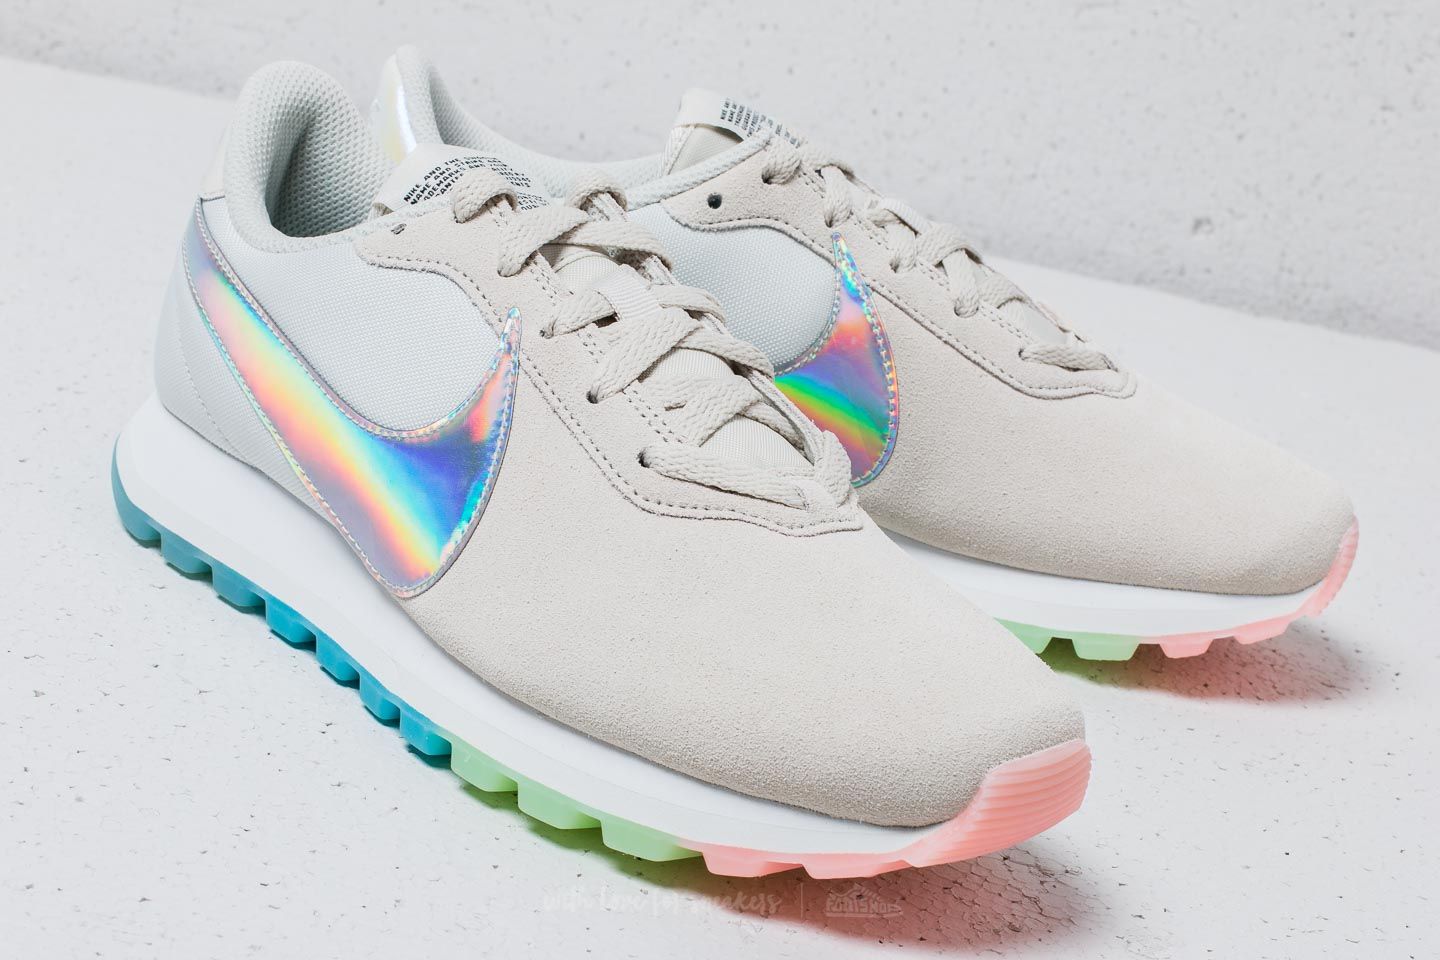 Now Available: Women's Nike Pre-Love "Iridescent" Sneaker Shouts